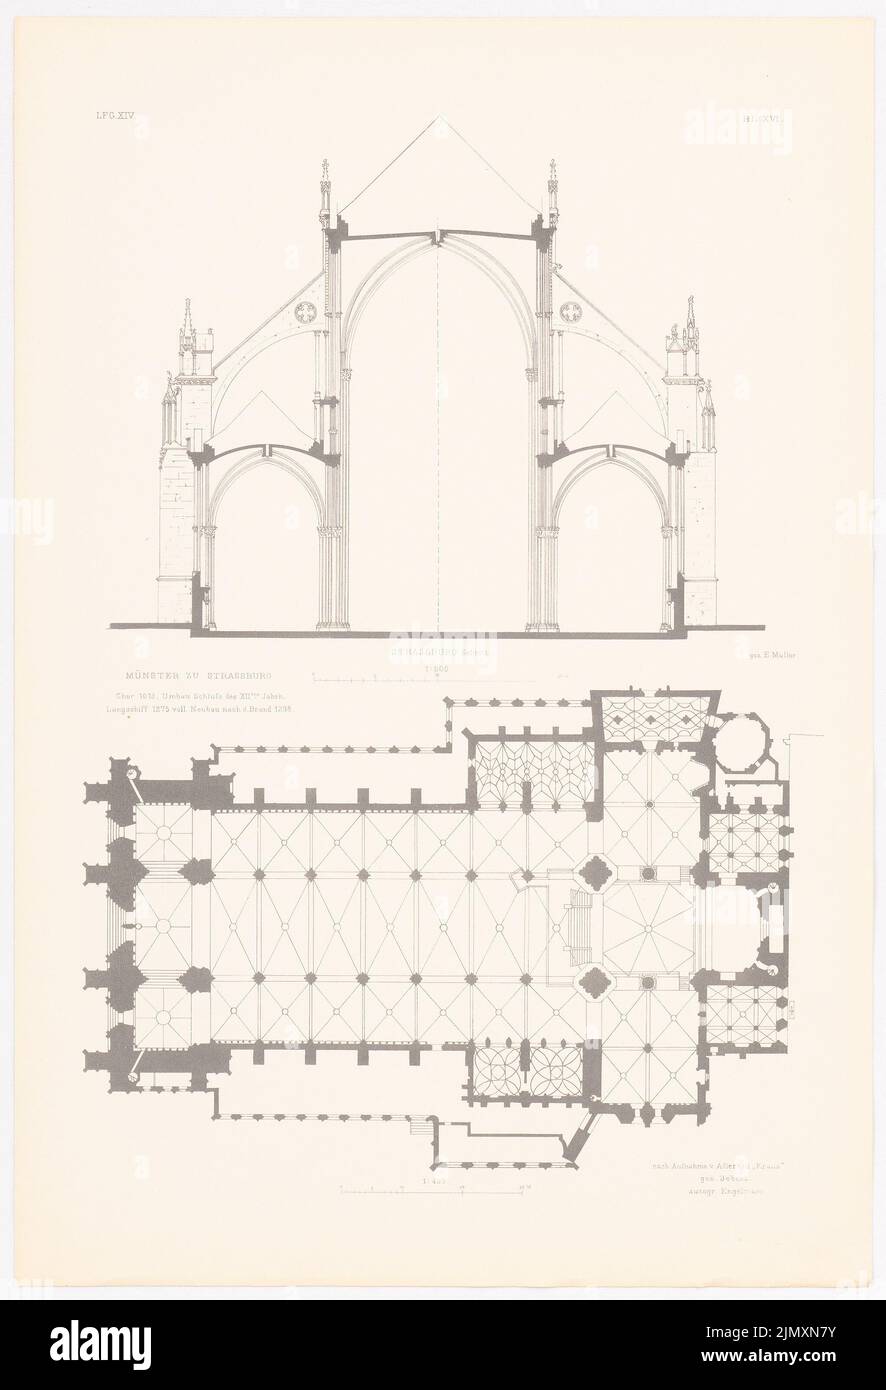 N.N., Strasburger Münster. (From: Gothic architecture in Germany, ed. V. Character Fish. D. Stud. TH Berlin, 1875) (1875-1875): cross-section, floor plan. Pressure on paper, 53.4 x 36.4 cm (including scan edges) Stock Photo